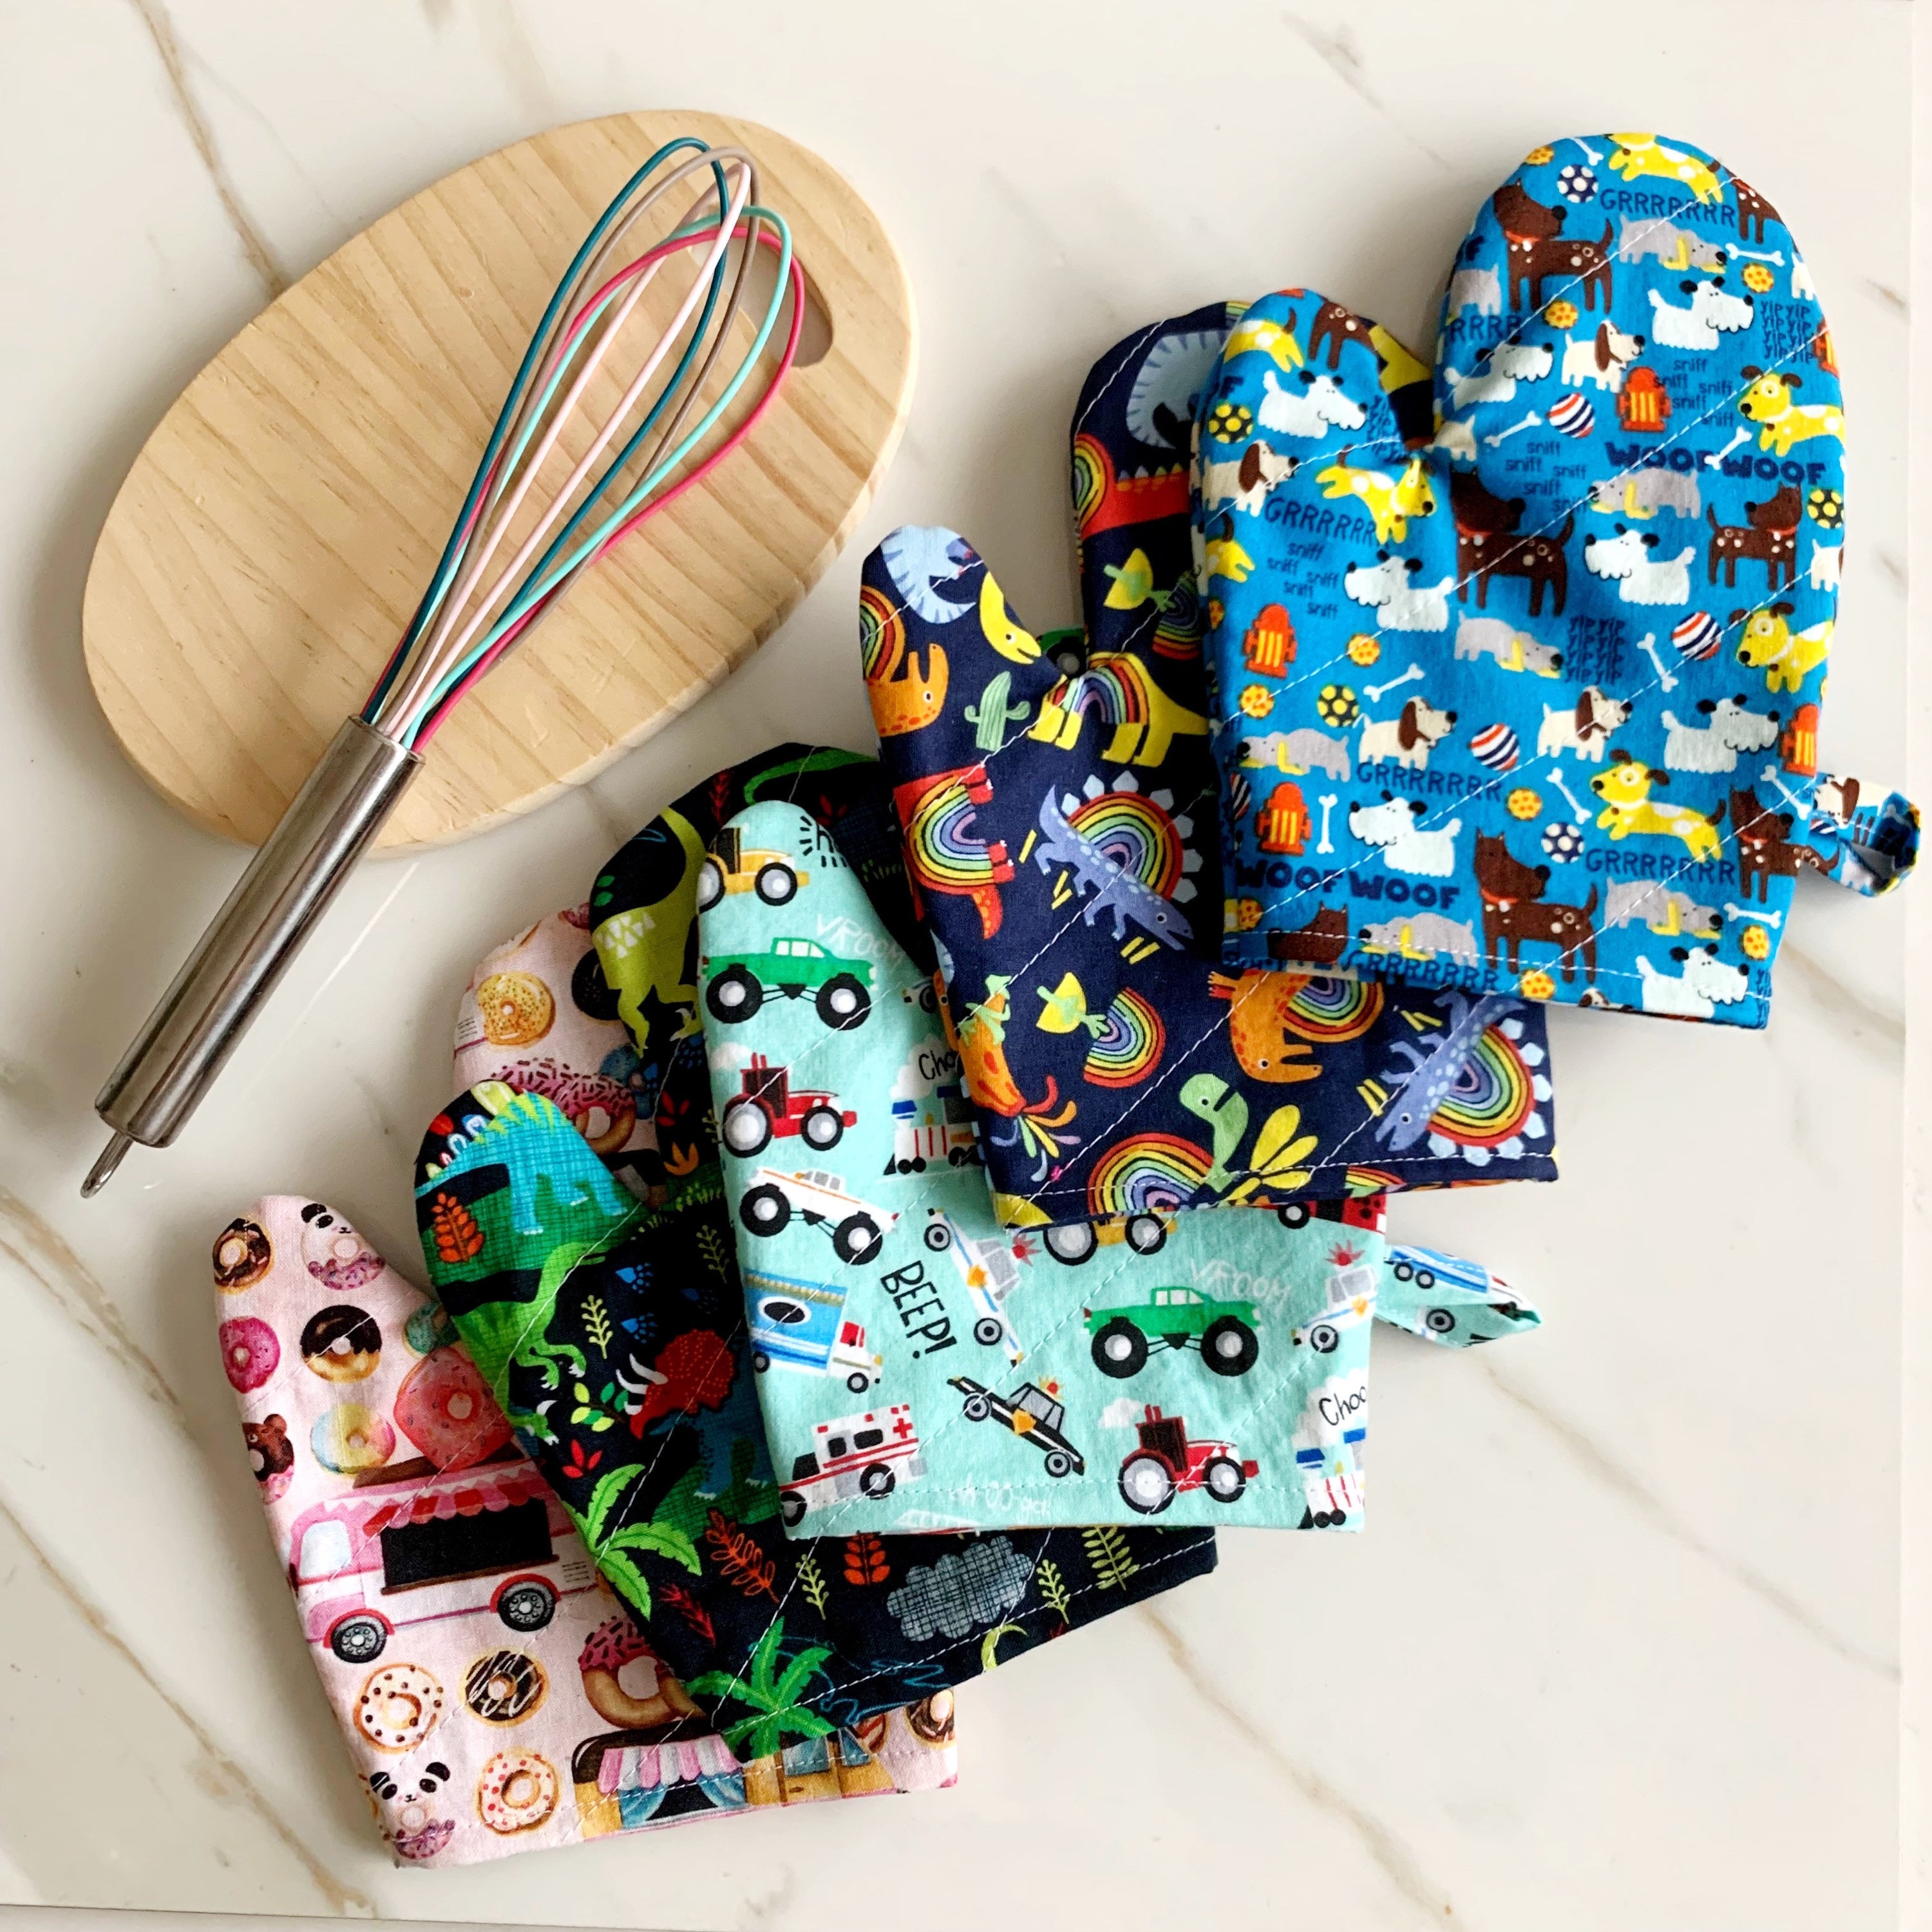 JANUARY PREORDER Kids Oven Mitts, Baking, Cooking, Play